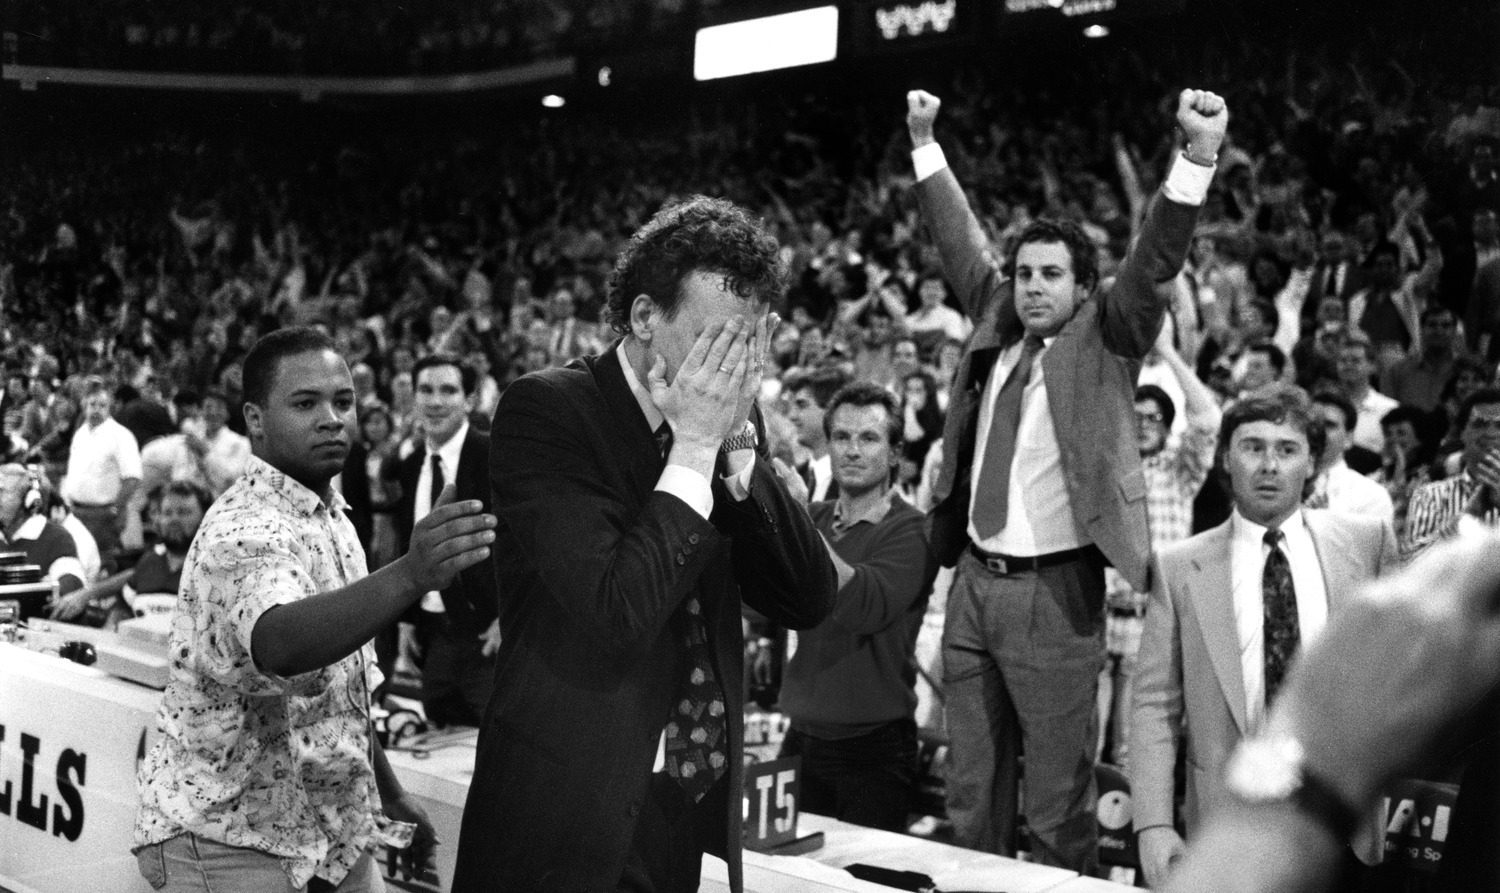 Black and white photograph of Chicago Bulls coach Doug Collins putting his hands to his face in front of the scorers table during a game.